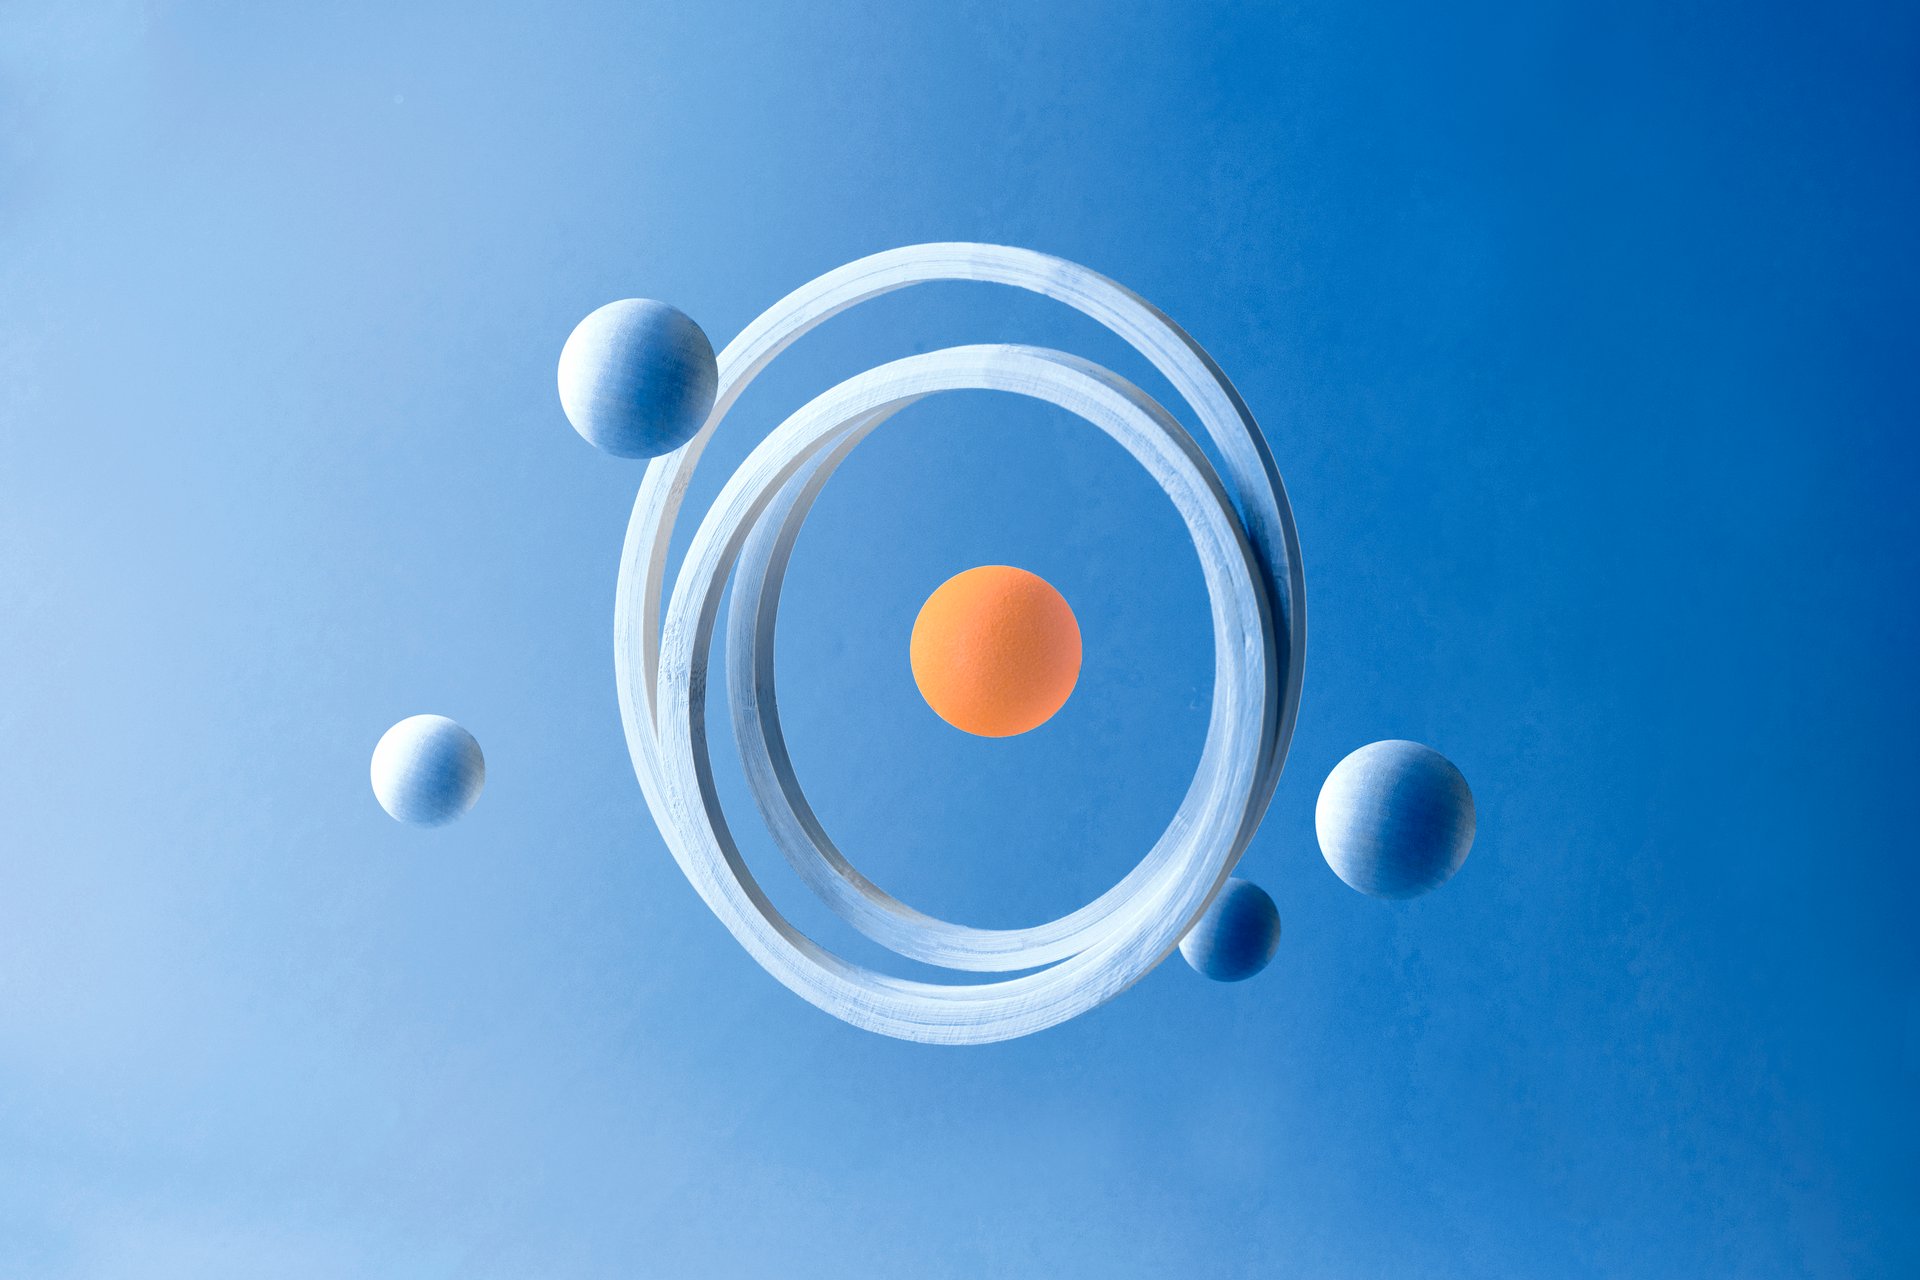 Abstract of blue and oranges spheres with circle hoops.